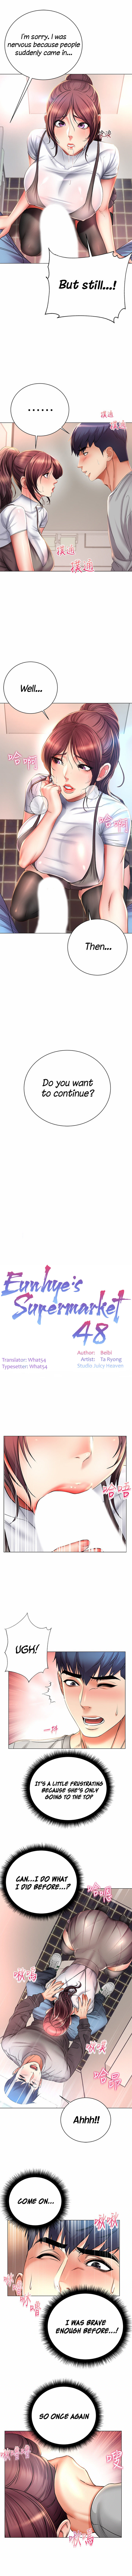 Eunhye’s Supermarket - Chapter 48 Page 2